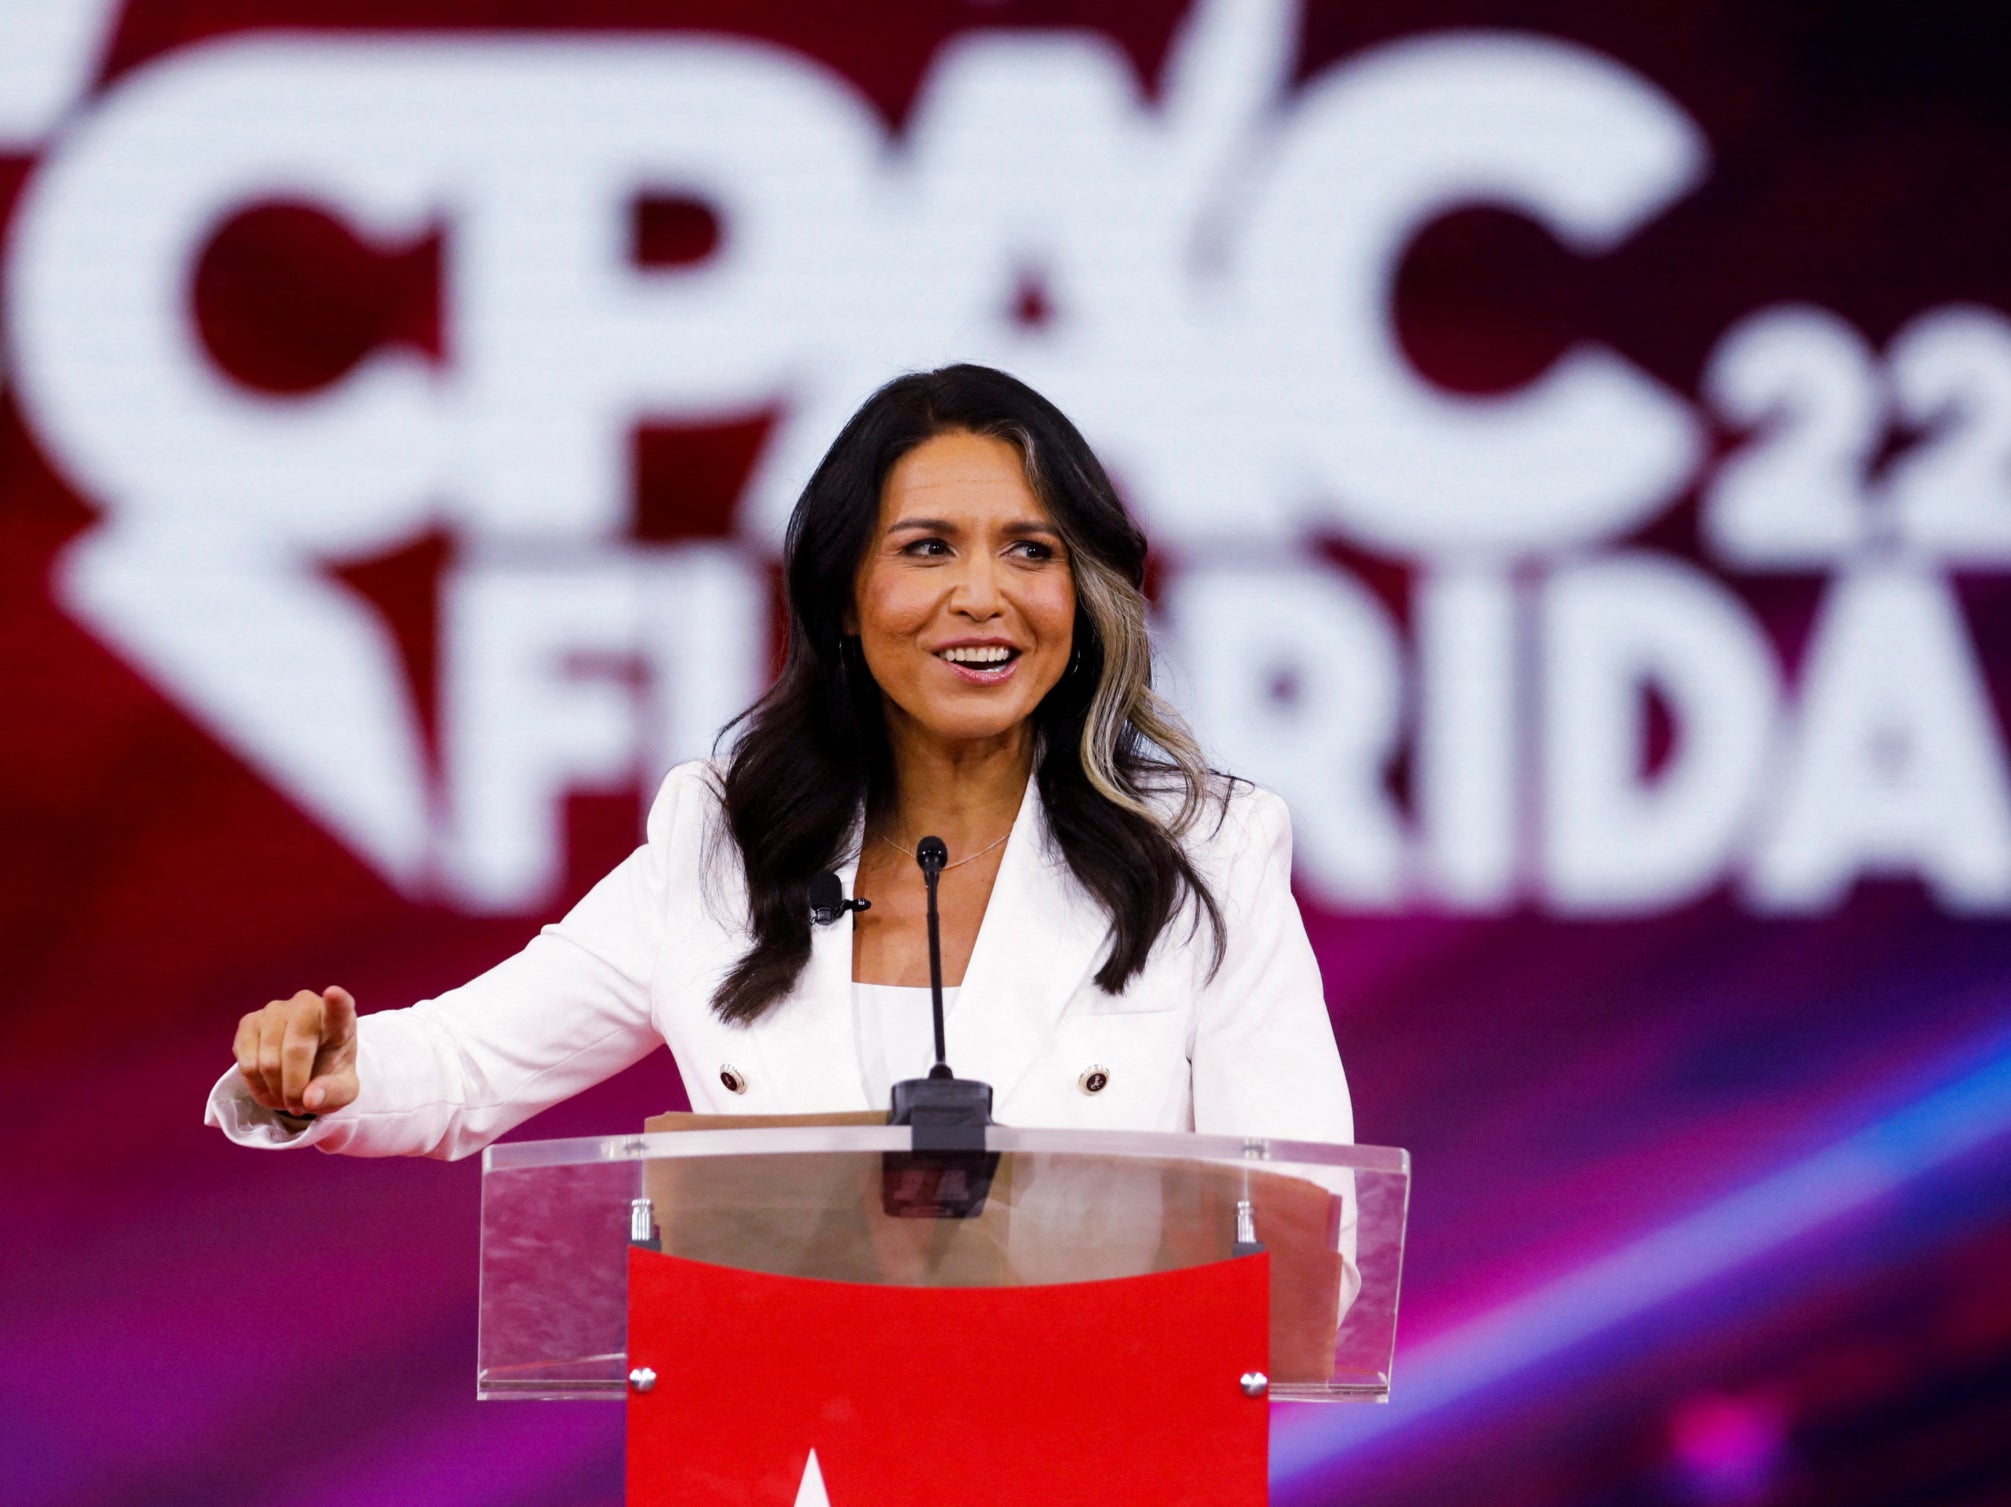 Tulsi Gabbard speaks at the Conservative Political Action Conference (CPAC) in Orlando in February